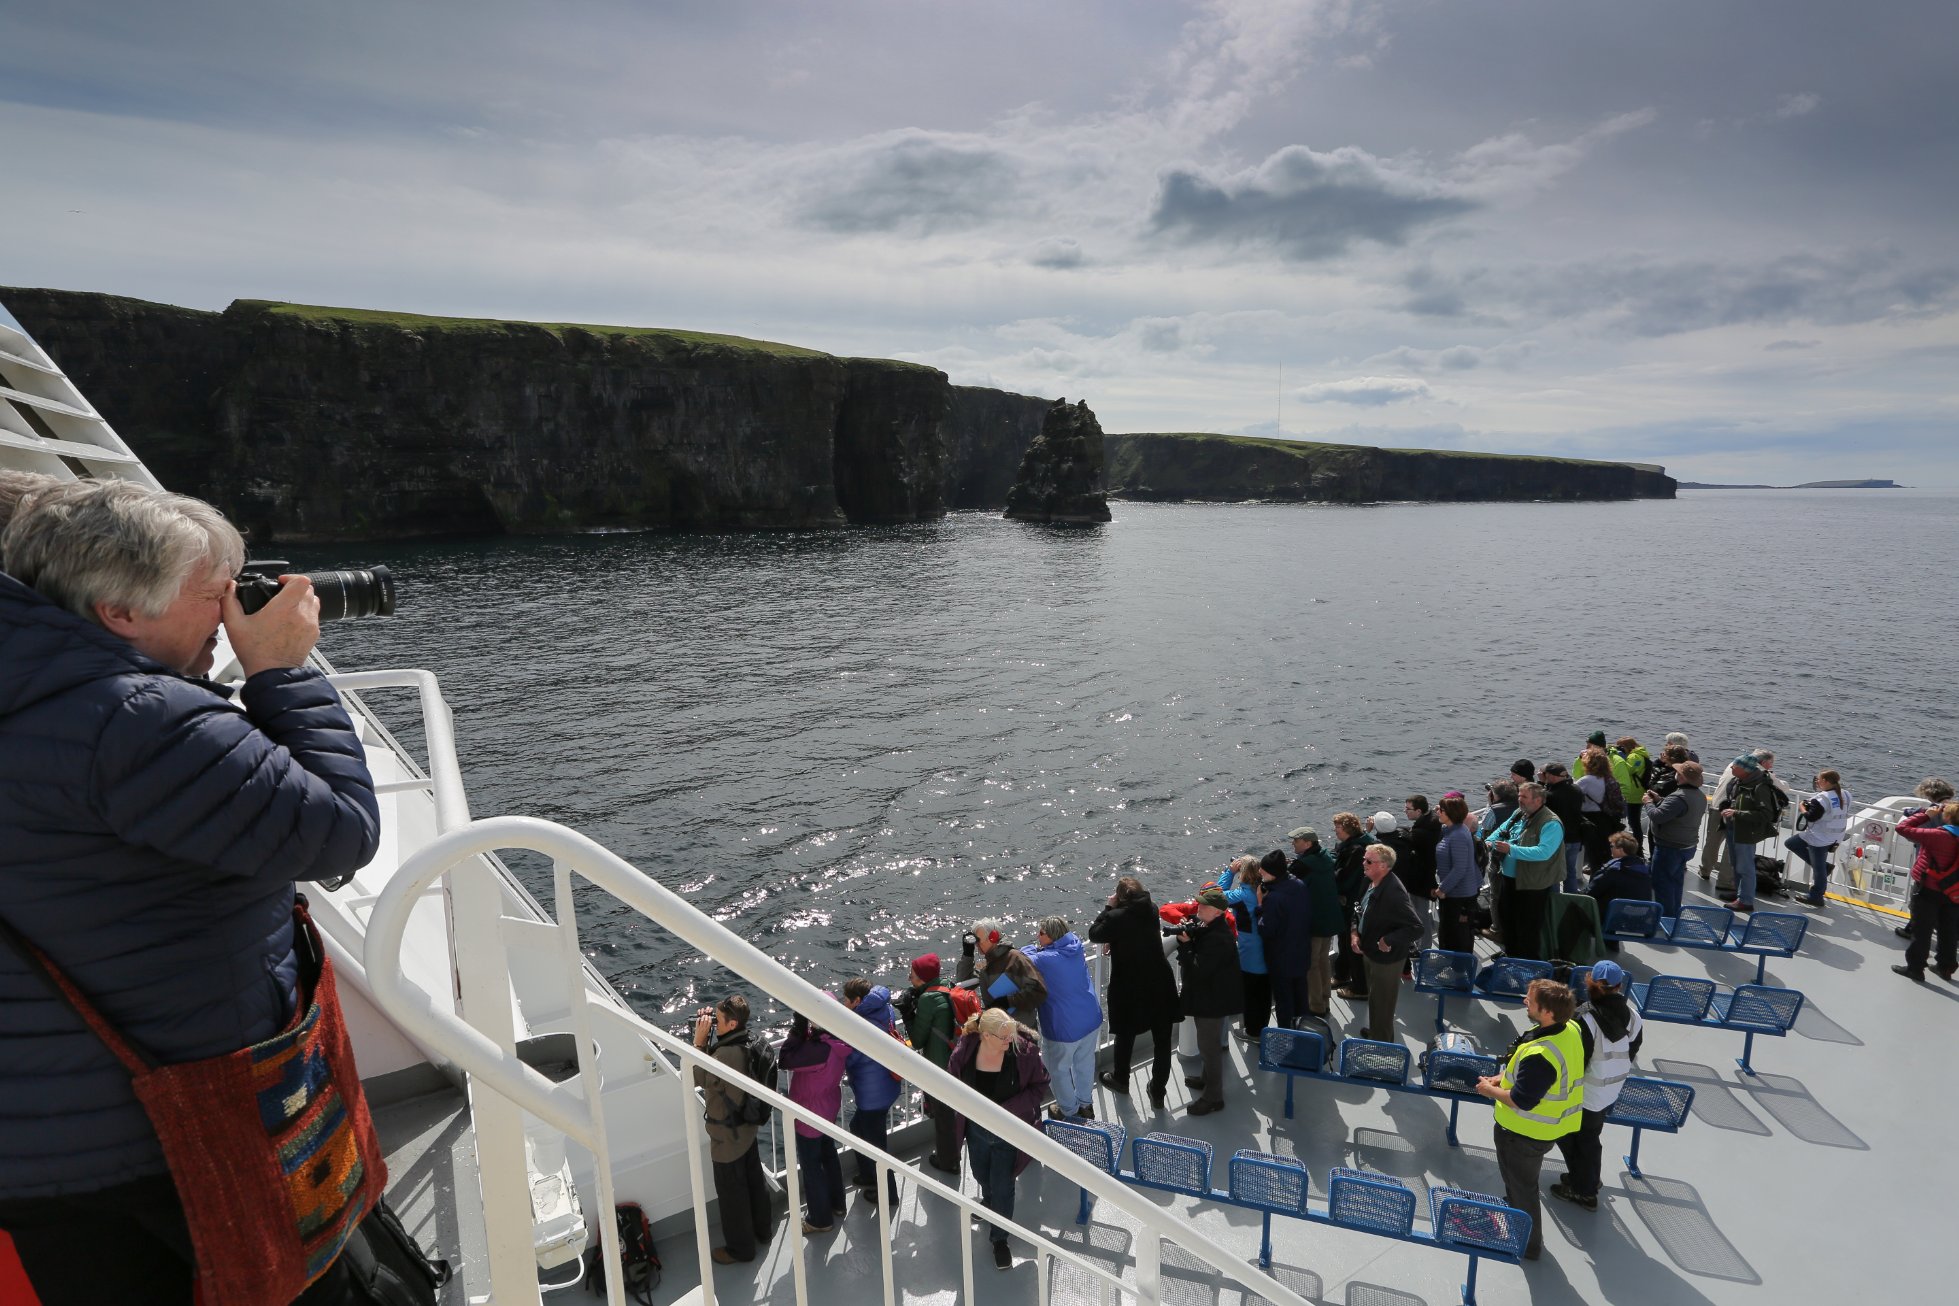 The Orkney Nature Festival Cruise in 2018